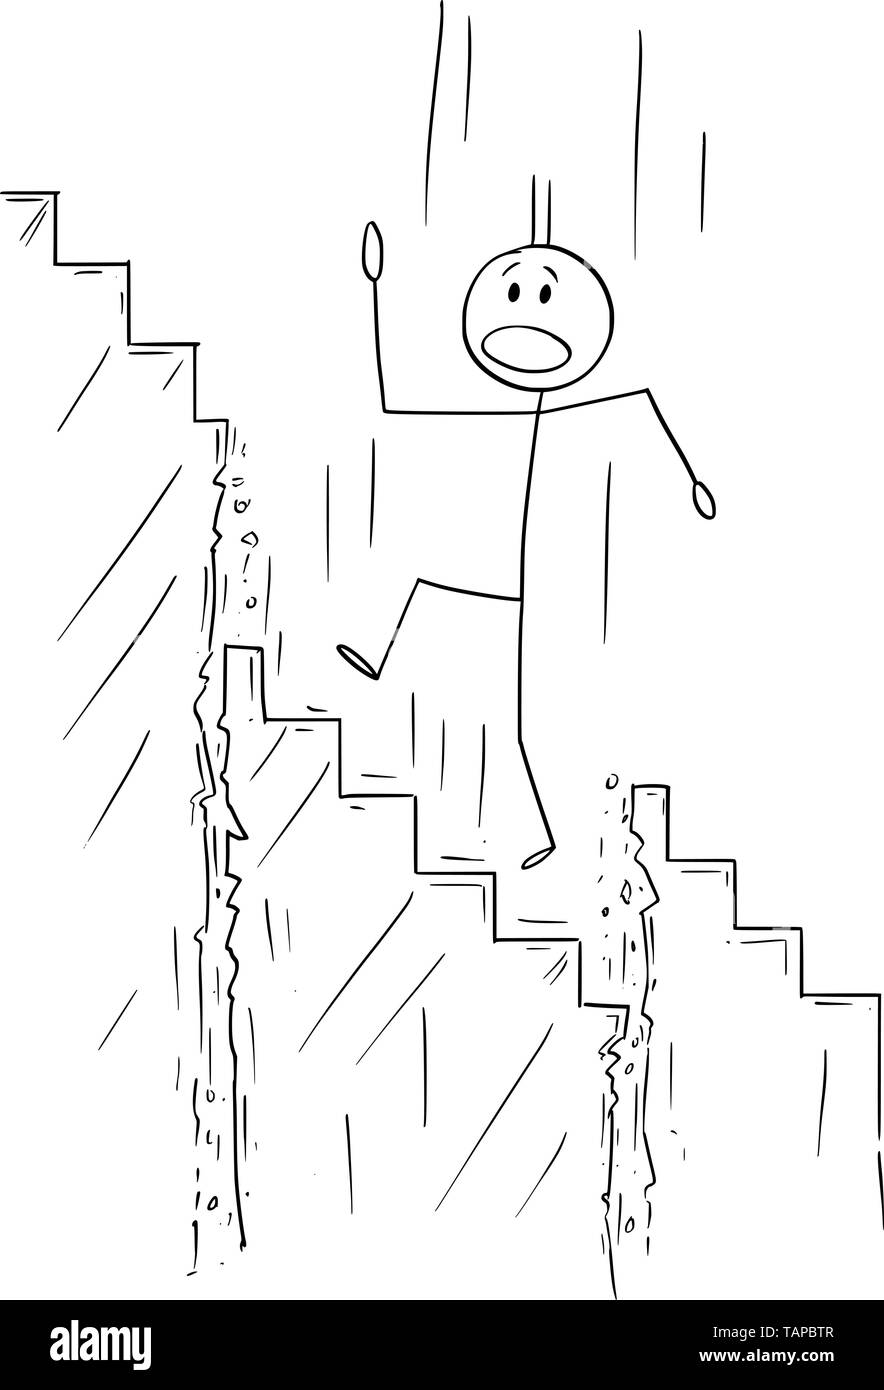 Vector cartoon stick figure drawing conceptual illustration of man or businessman walking or climbing up the stairs while staircase is collapsing and he is falling down.Business or career metaphor. Stock Vector